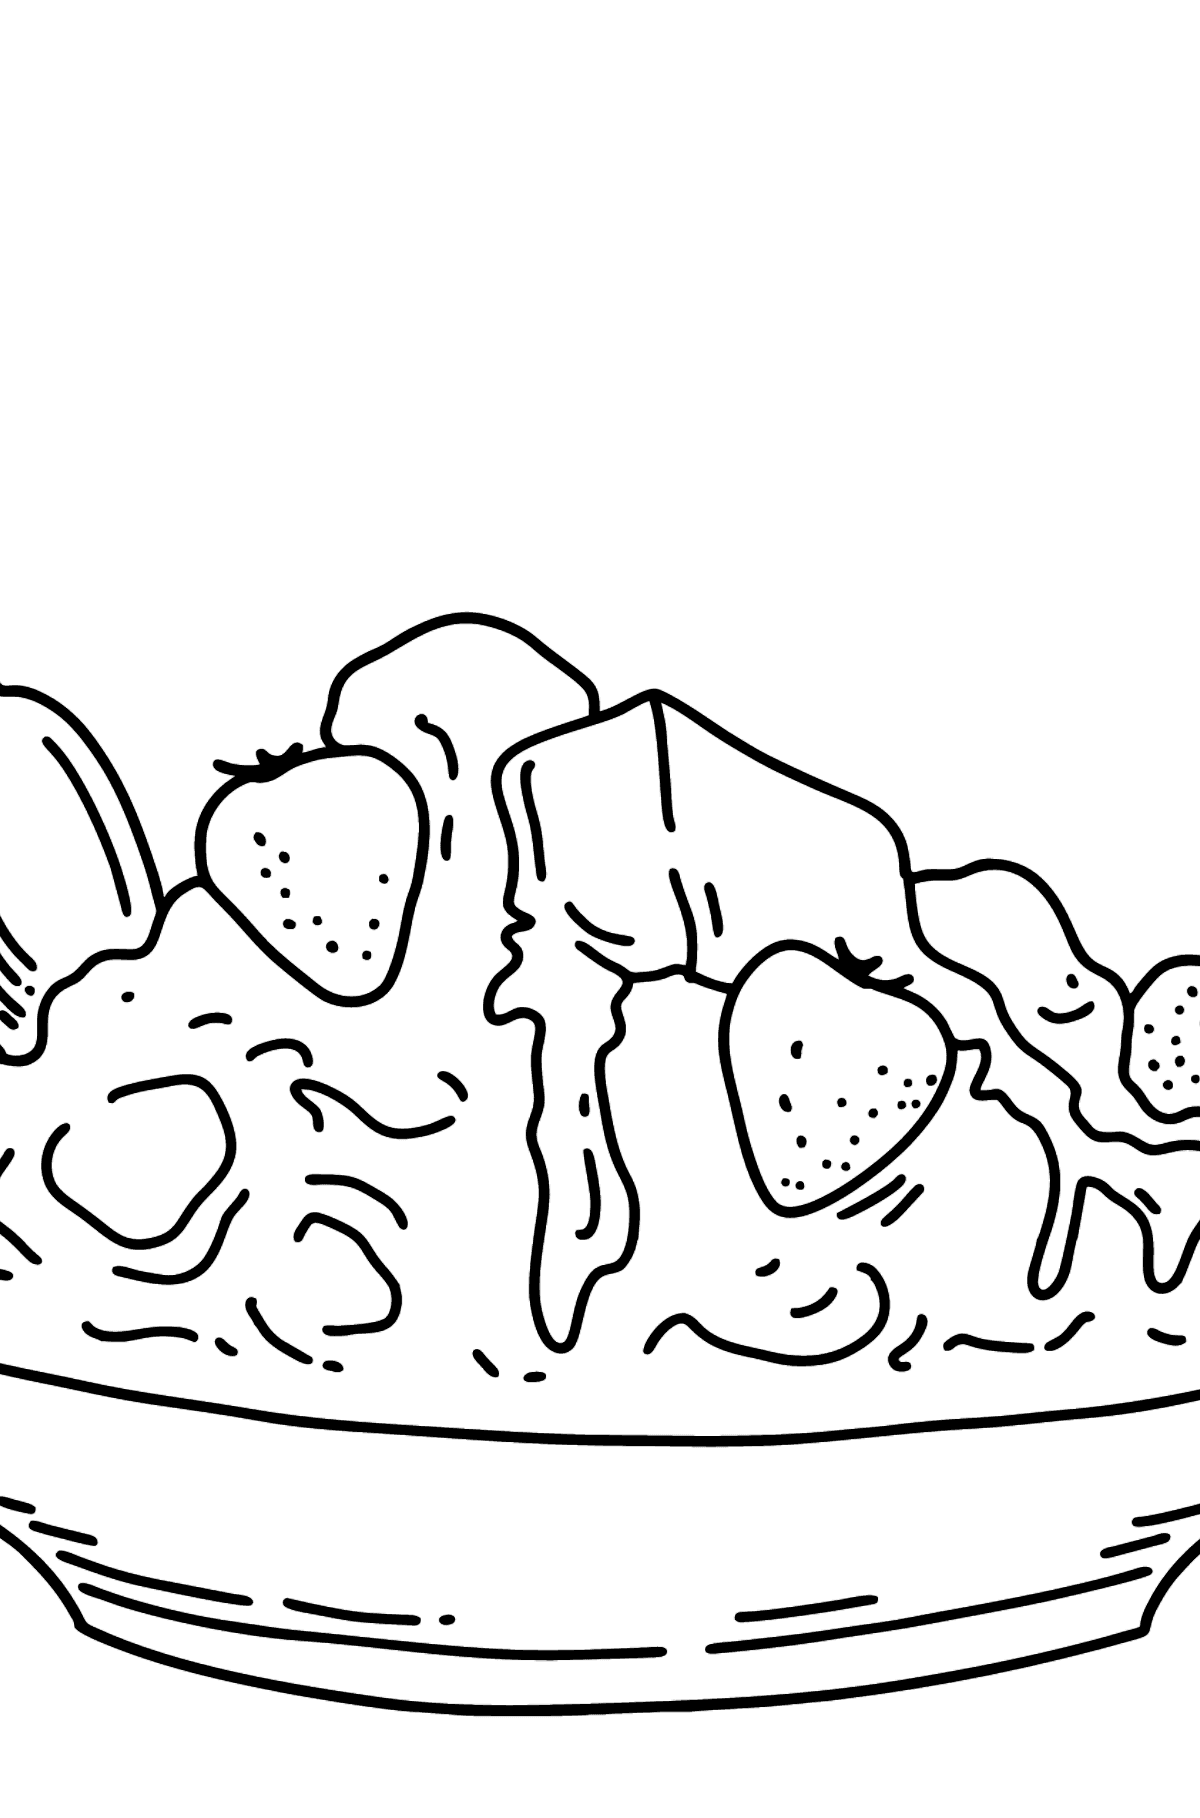 Porridge coloring page - Coloring Pages for Kids